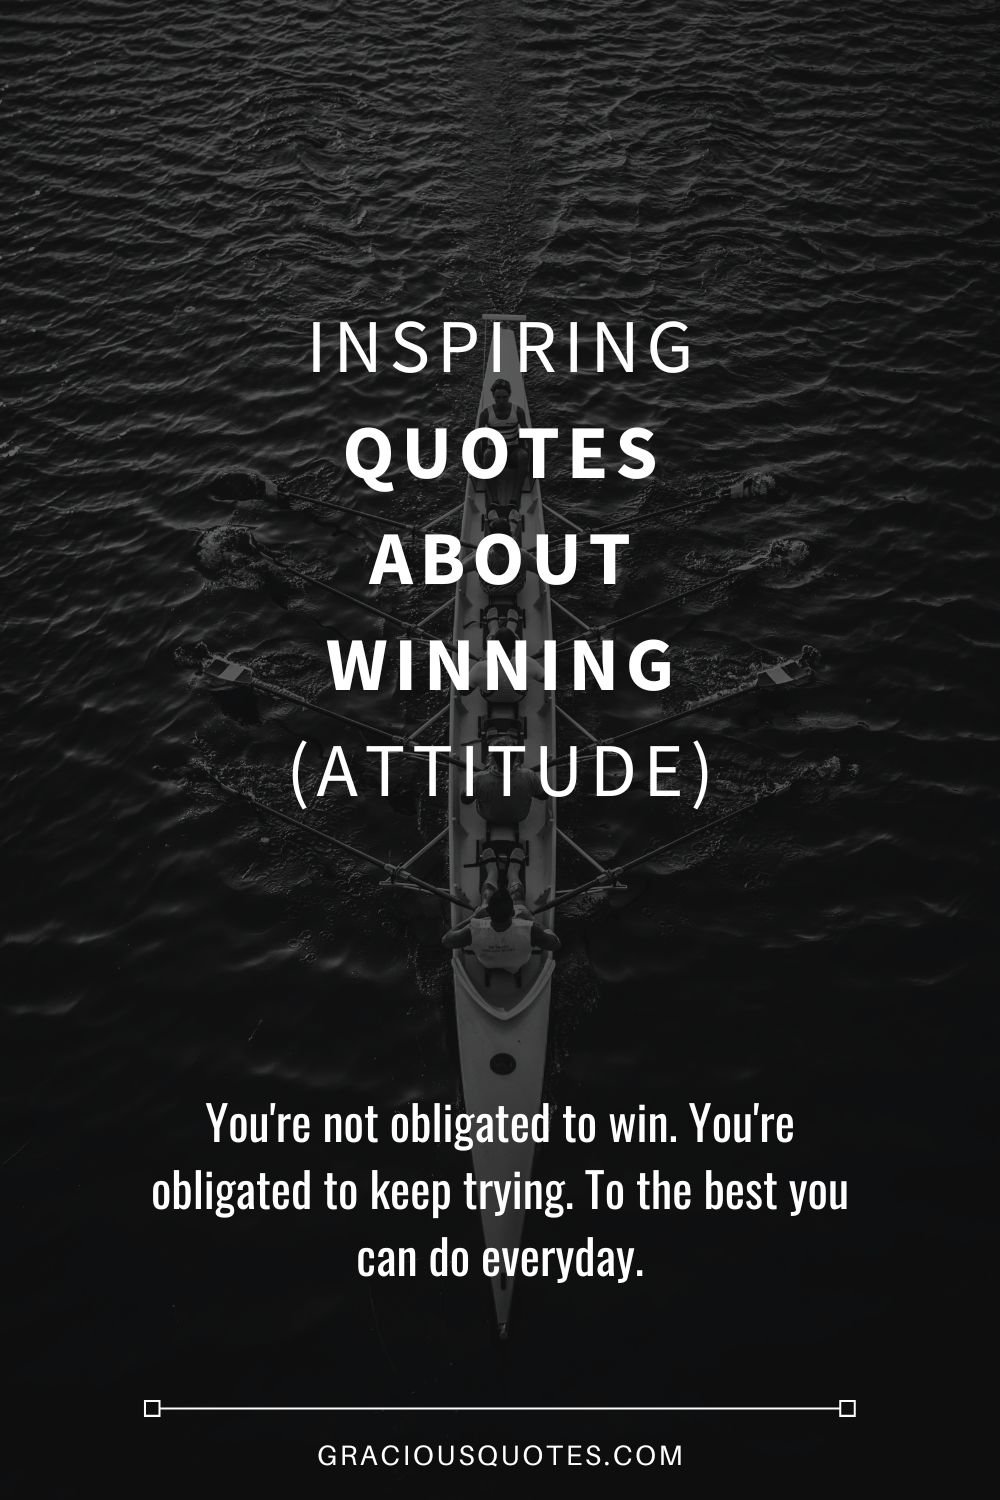 Inspiring Quotes About Winning (ATTITUDE) - Gracious Quotes